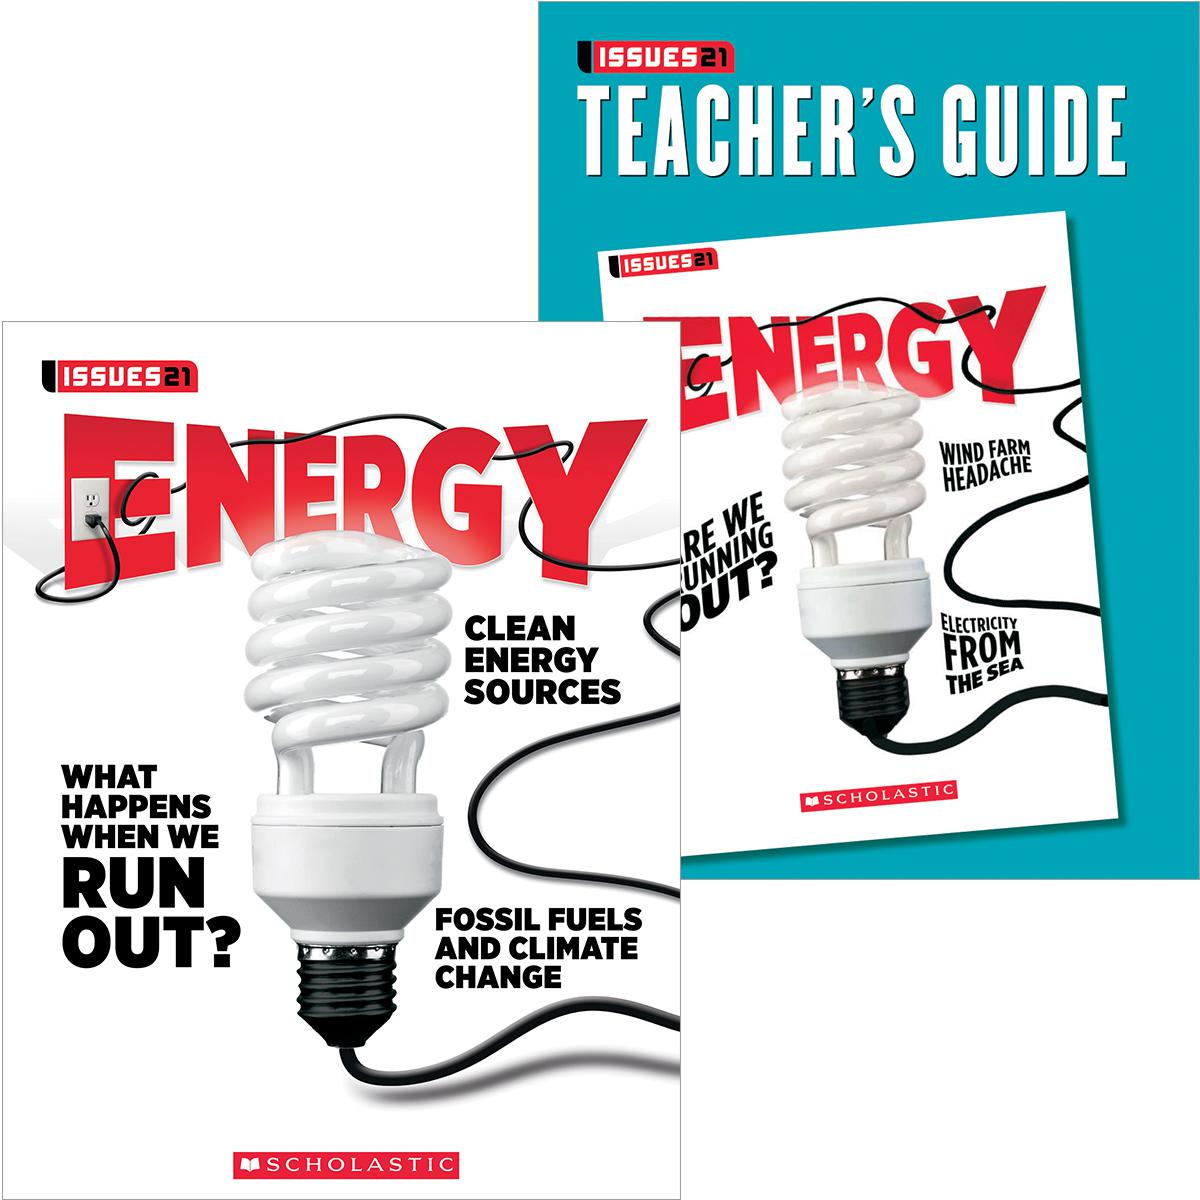  Issues 21: Energy 6-Pack with Teaching Guide 